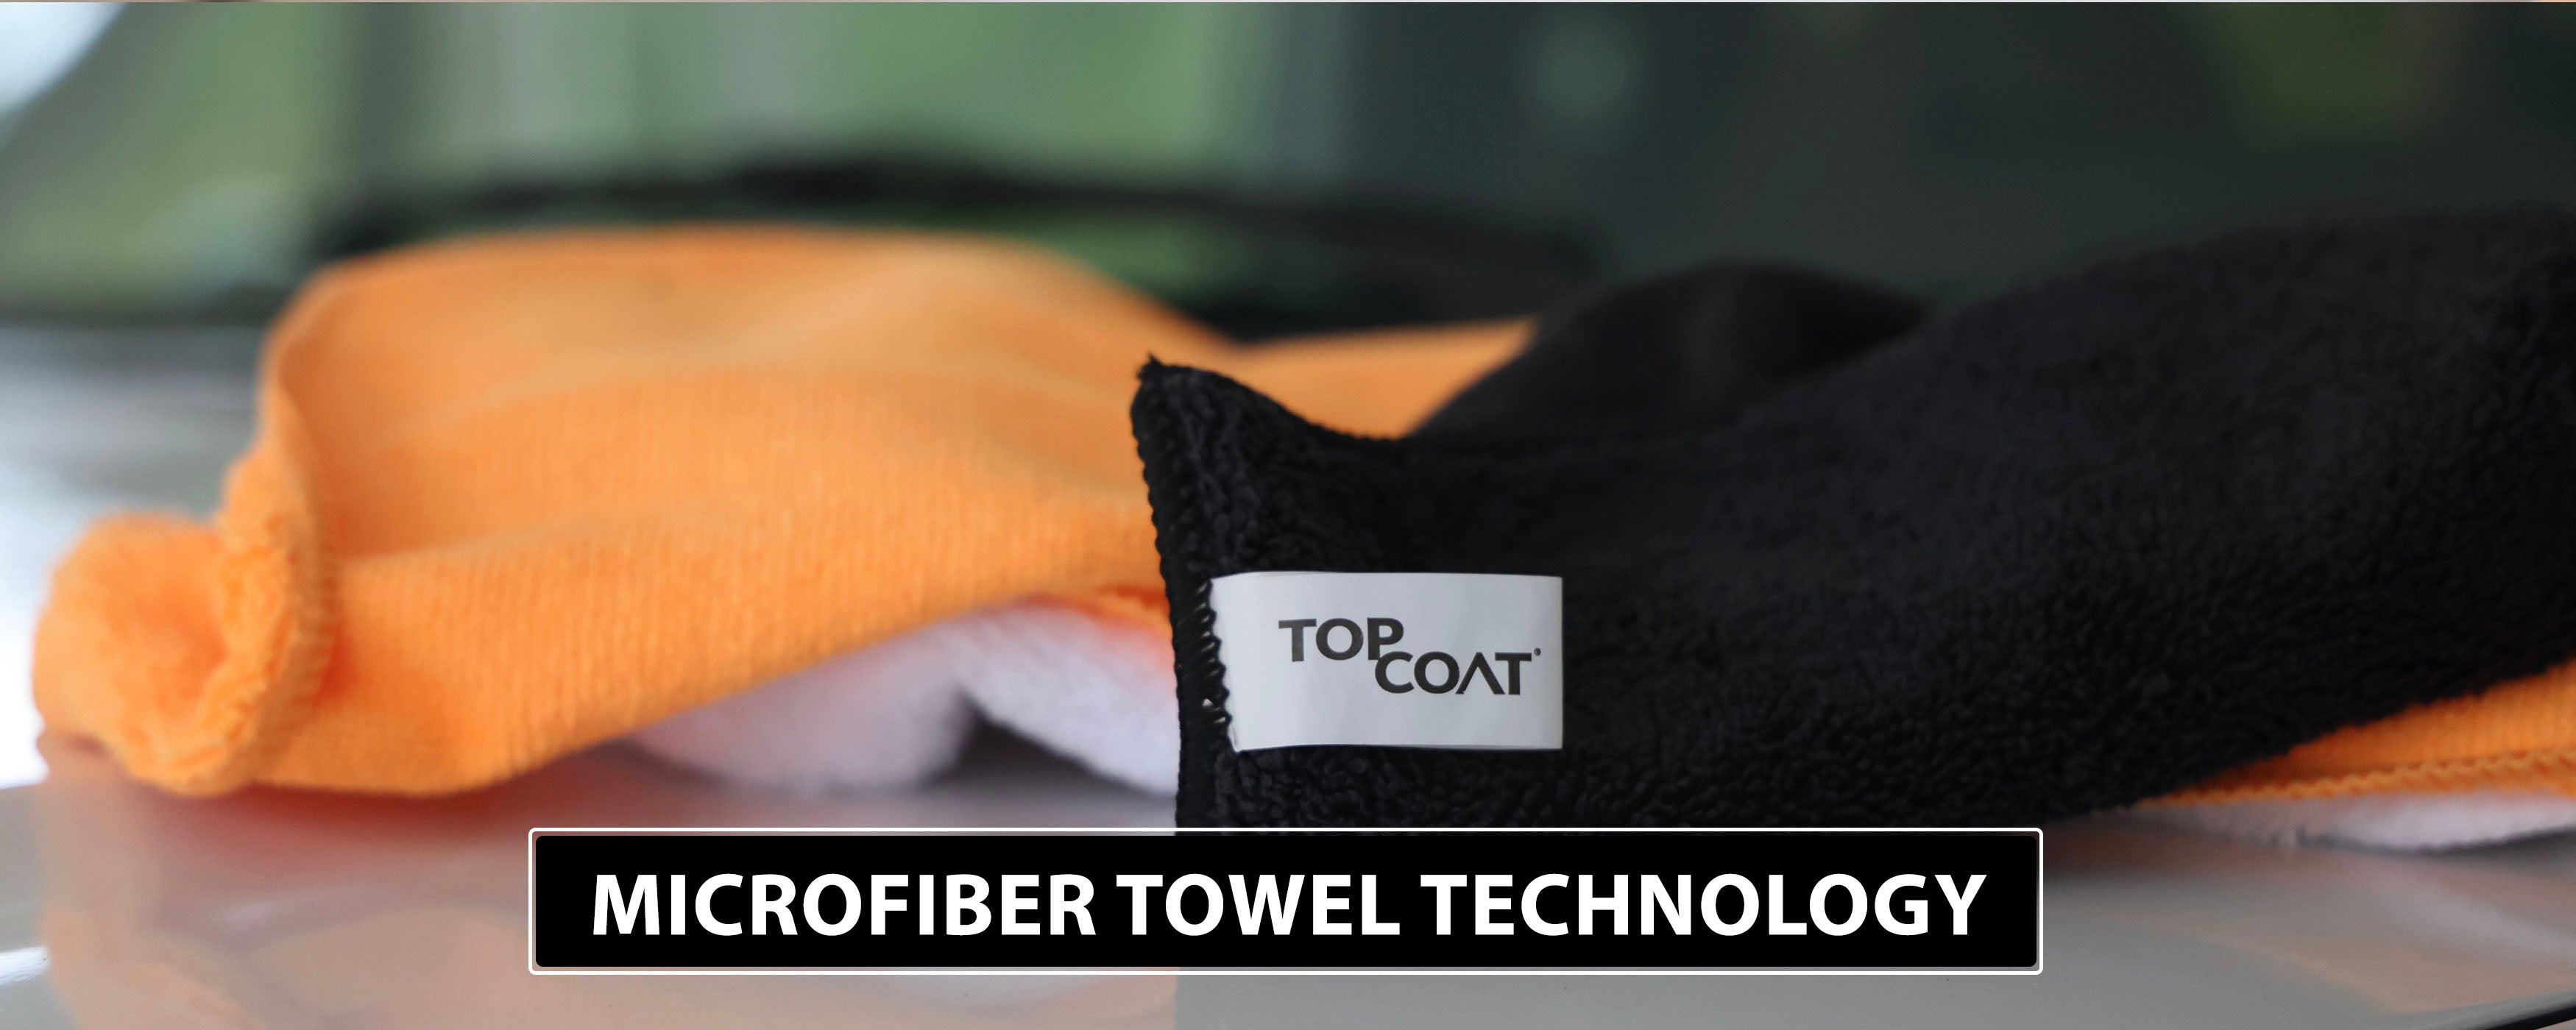 Microfiber Towel Technology: What Is It & Why You Should Use Microfiber Towels to Detail Your Vehicle